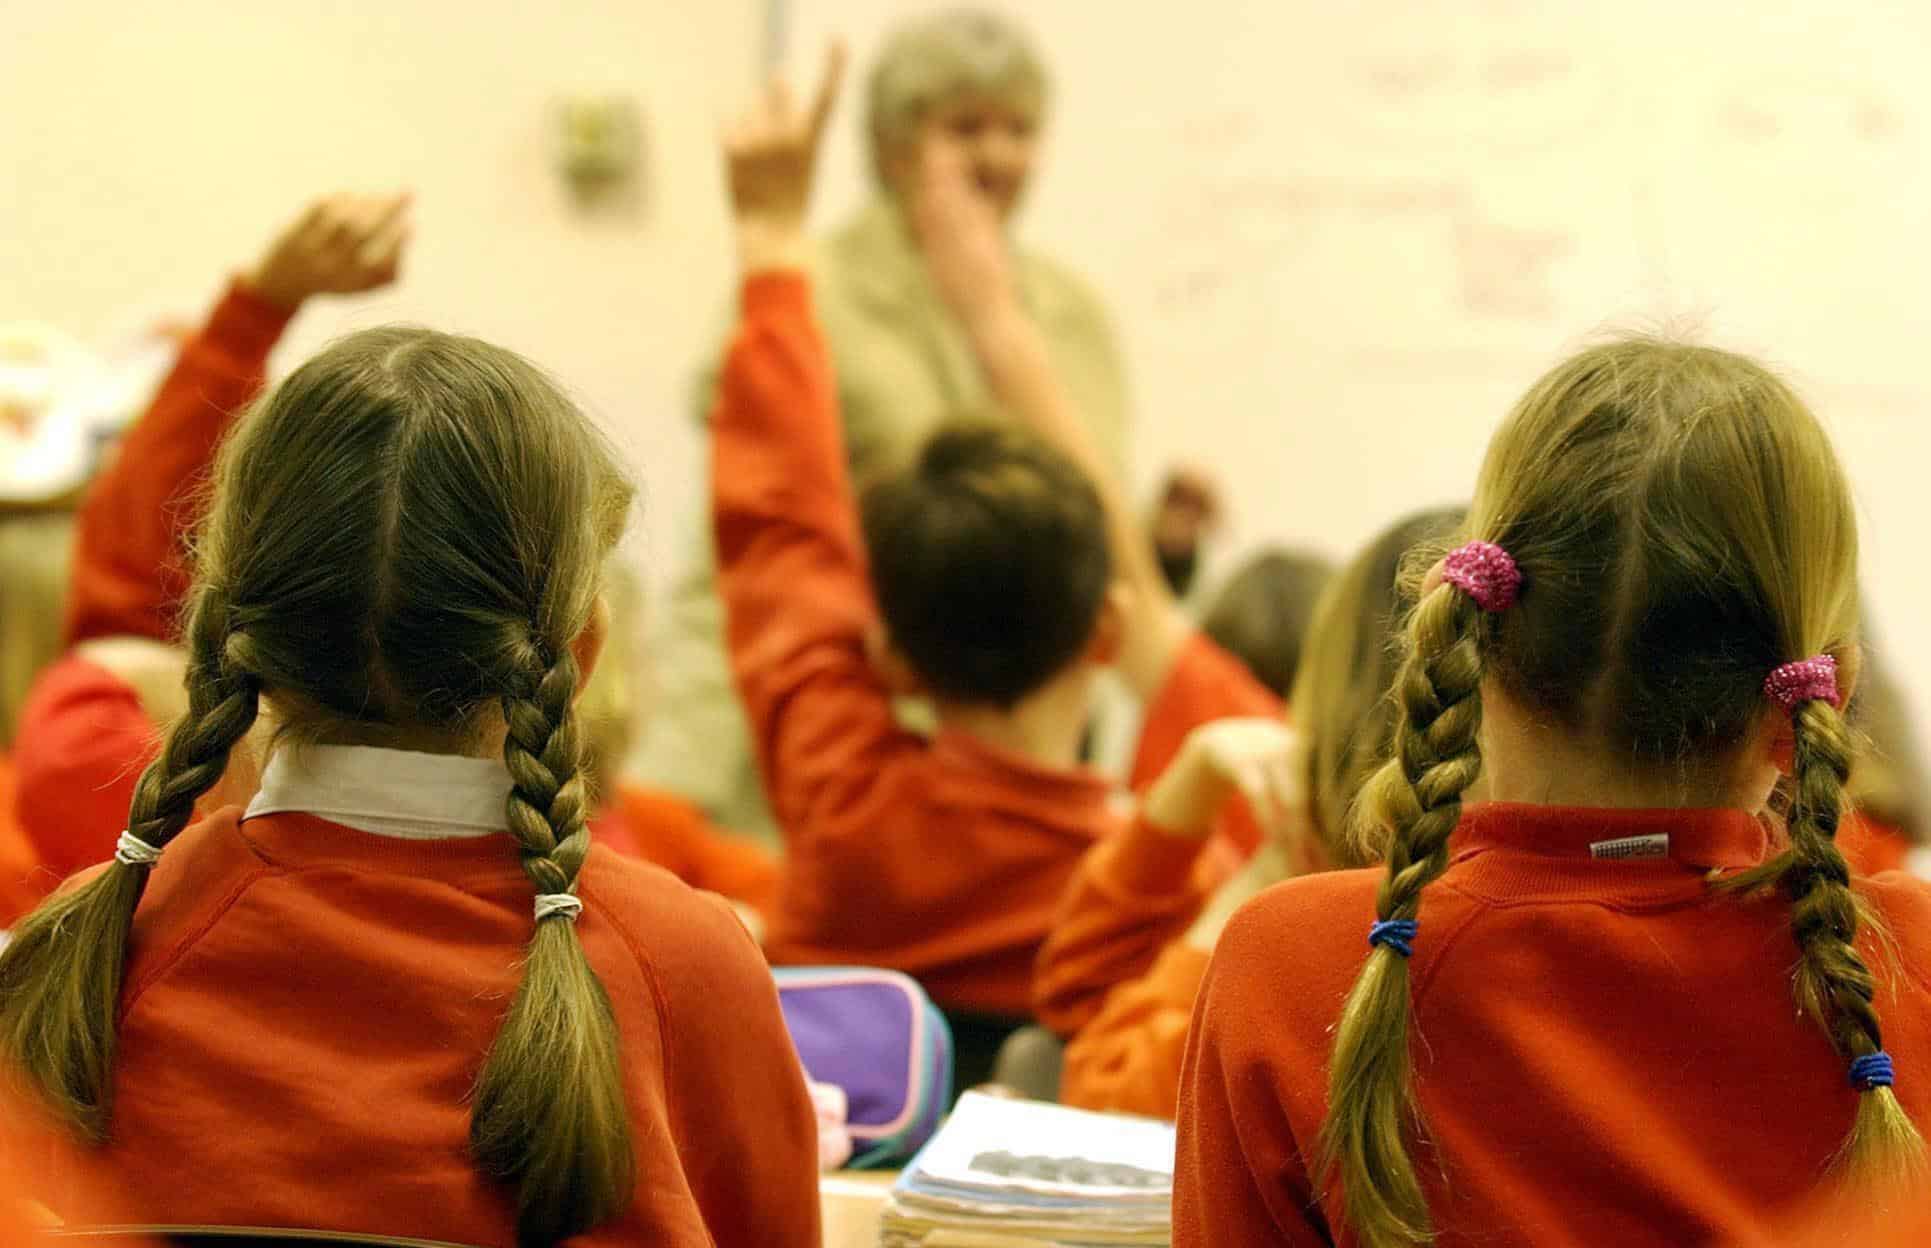 Teachers reveal ‘Oliver Twist reality’ of life on the breadline for children in Britain